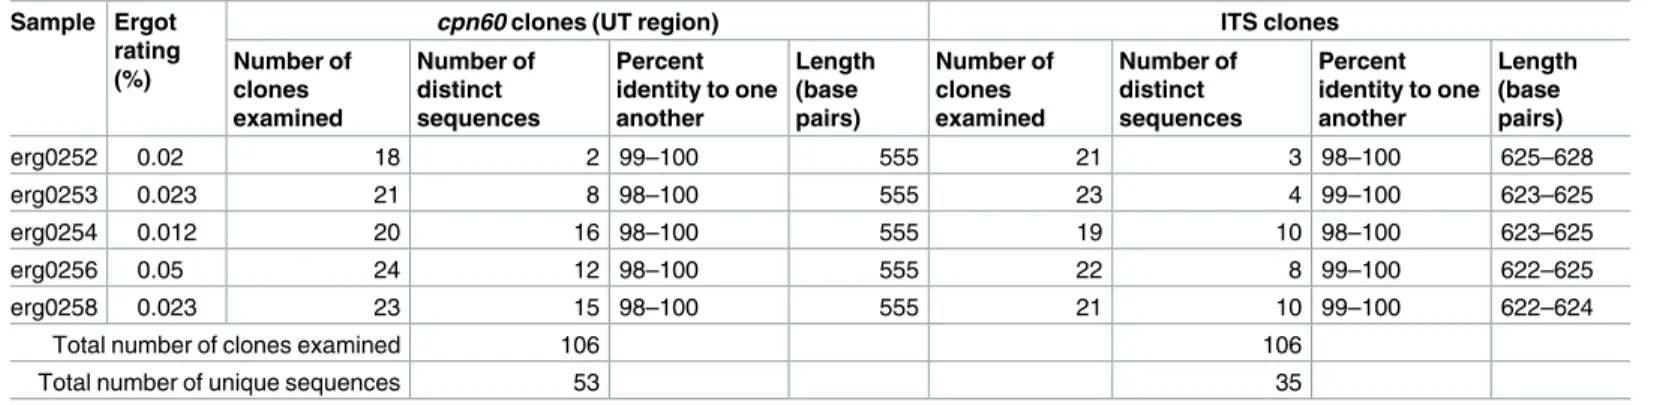 Table 3. ITS and cpn60 clone diversity observed in sclerotia sourced from Manitoba, Canada.